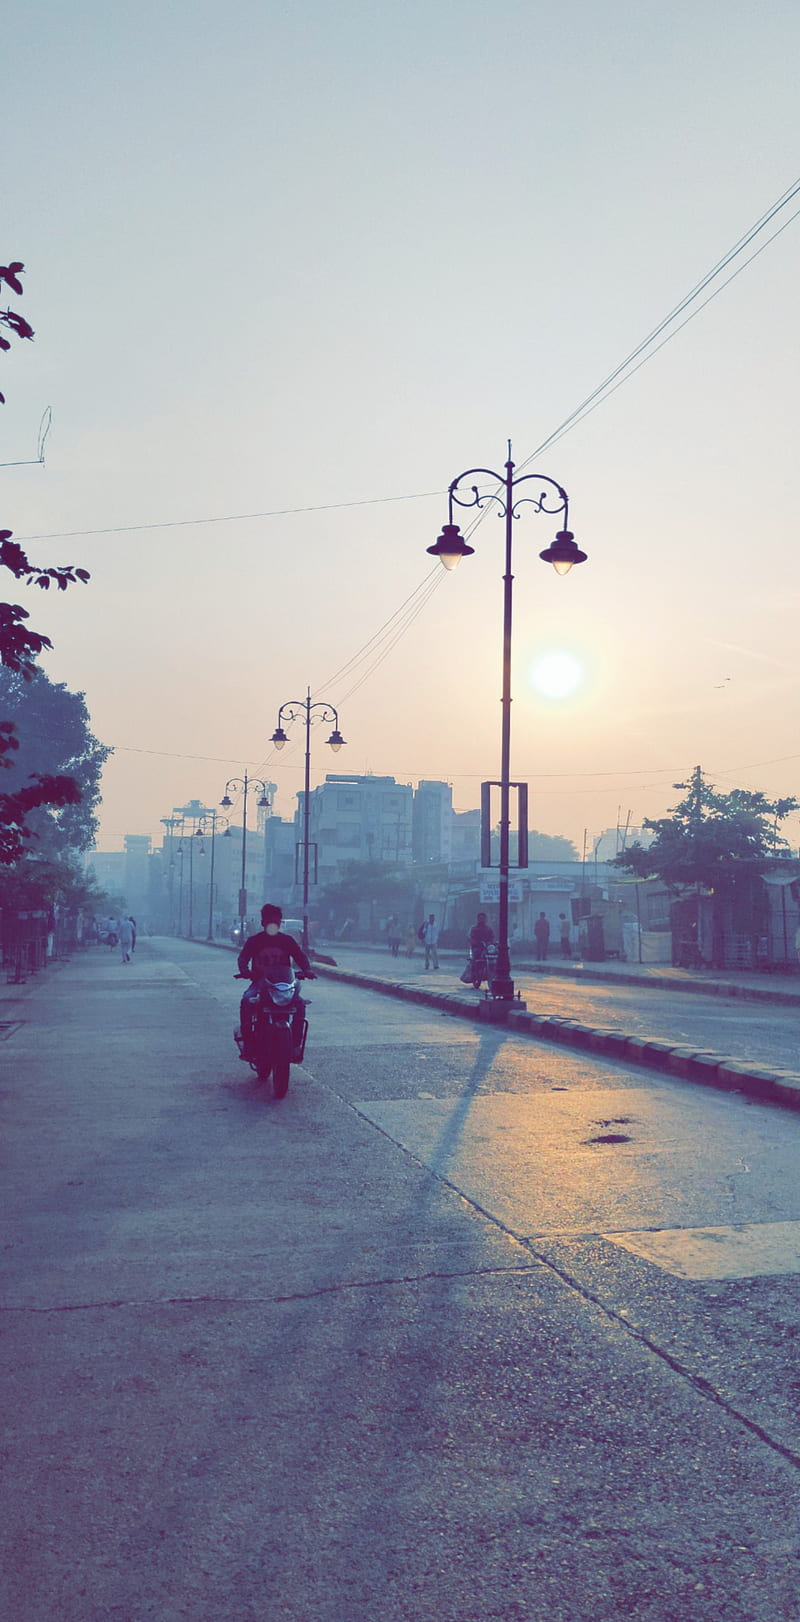 Street View Street Lamp Road After Rain Background Wallpaper Image For Free  Download - Pngtree